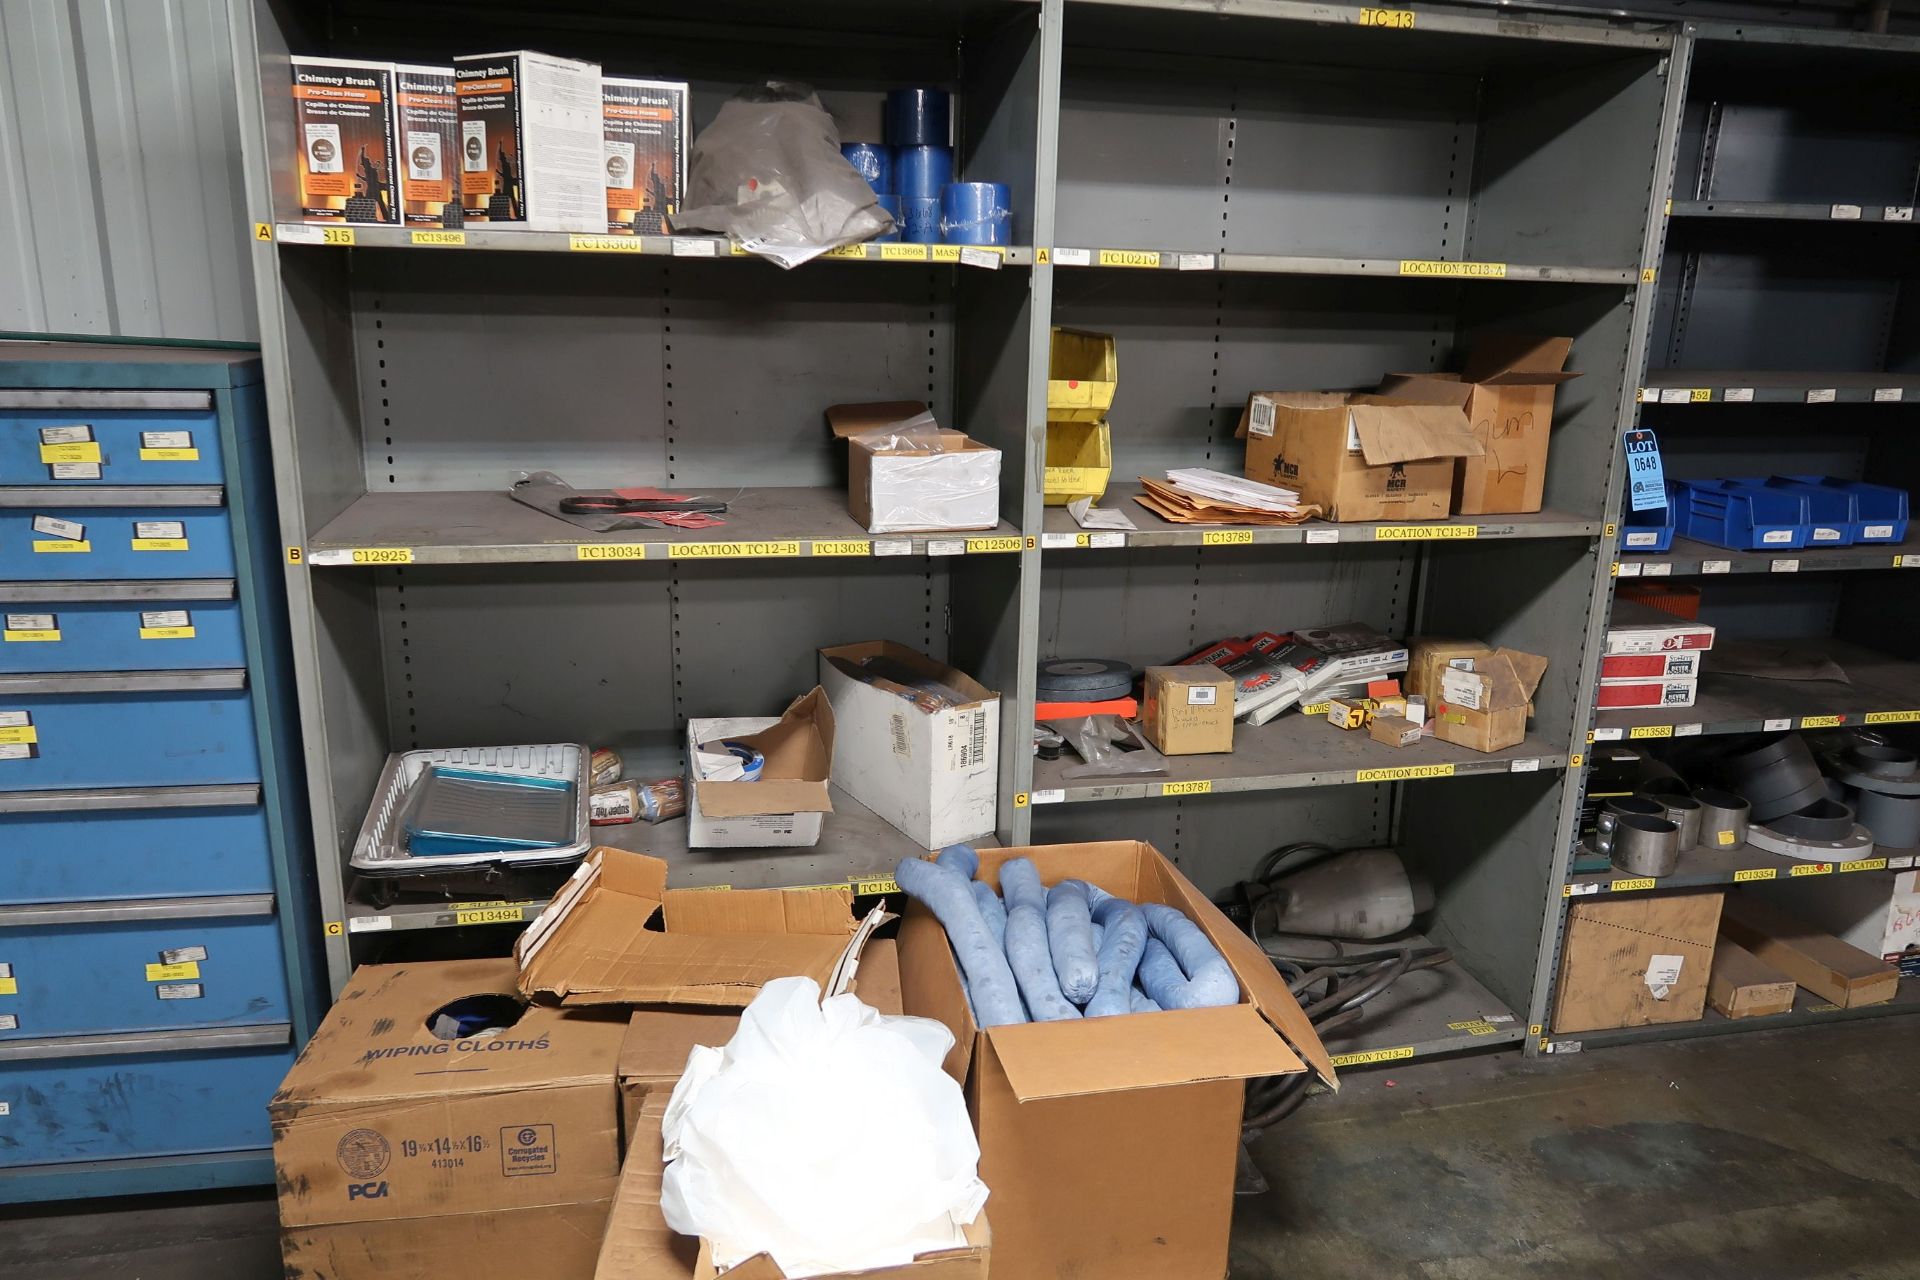 (LOT) GREY SHELVING (4) AND METRO RACK WITH CONTENTS - MAINTENANCE **LOADING PRICE DUE TO ERRA - $ - Image 2 of 3